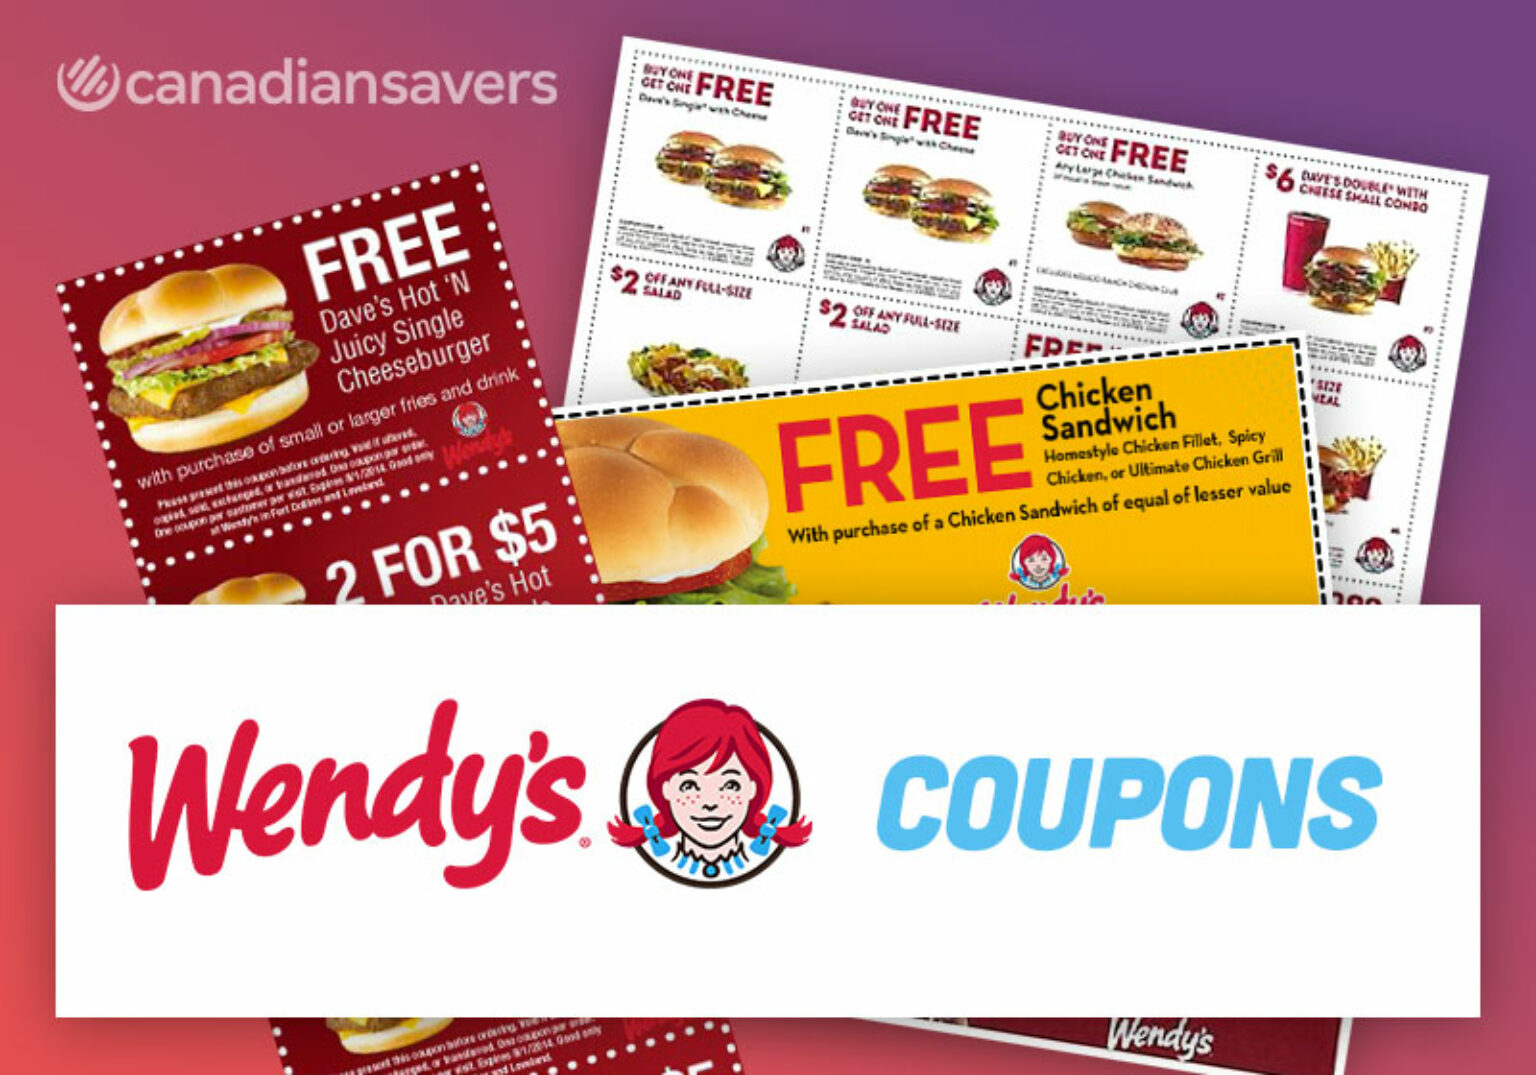 New Wendys Coupons & Deals for Canada in July 2021